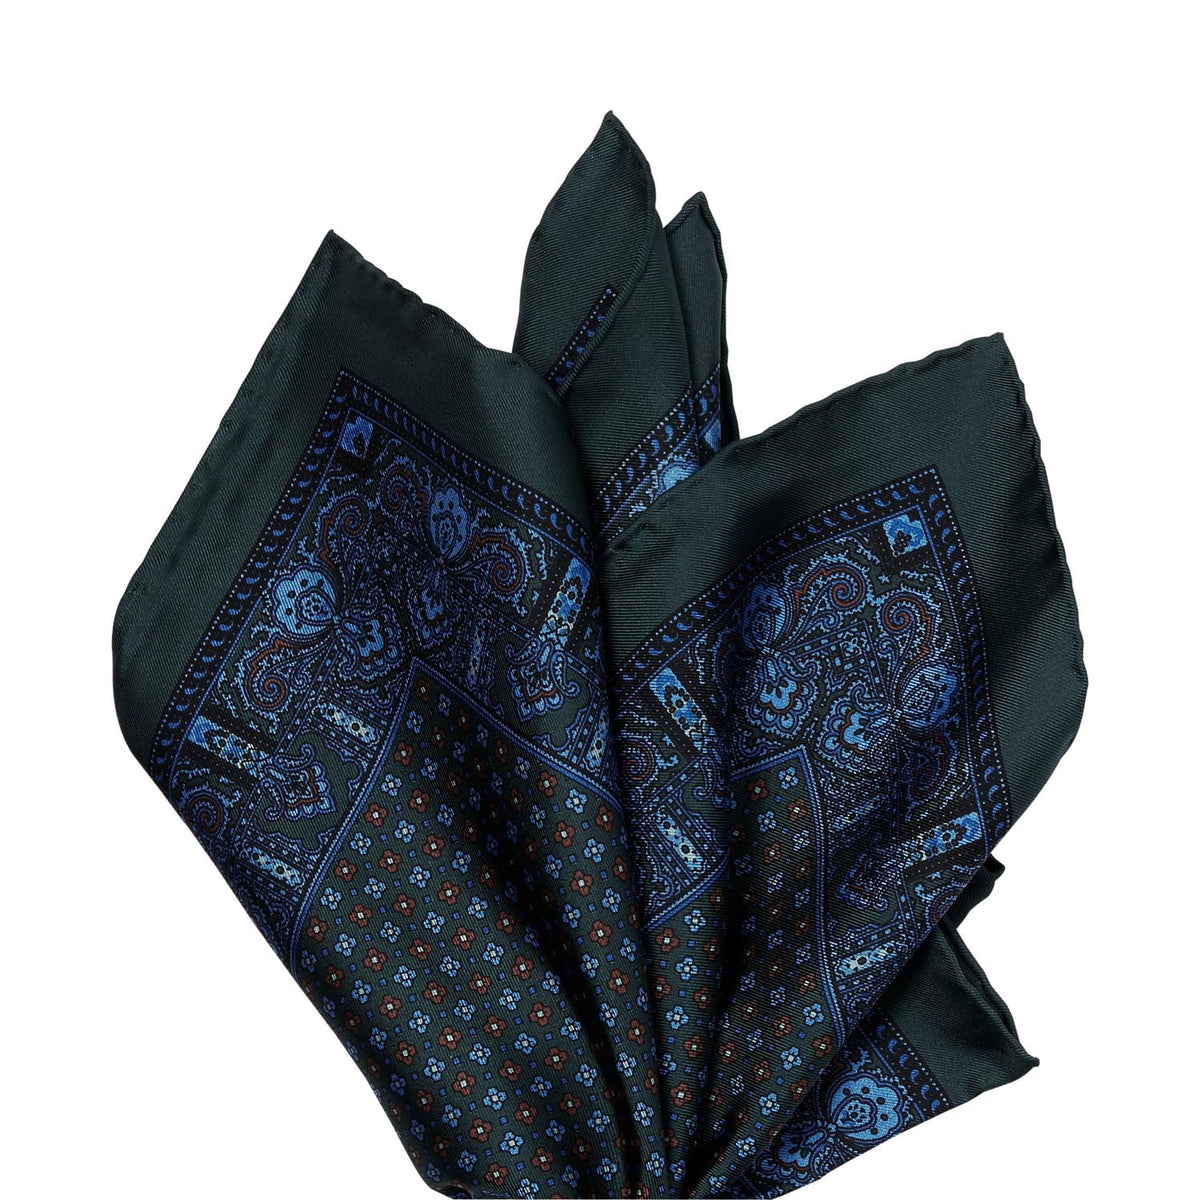 A Sovereign Grade 100% Silk Forest Repeating Floral pocket square with hand-rolled edges in a black and blue paisley pattern by KirbyAllison.com.